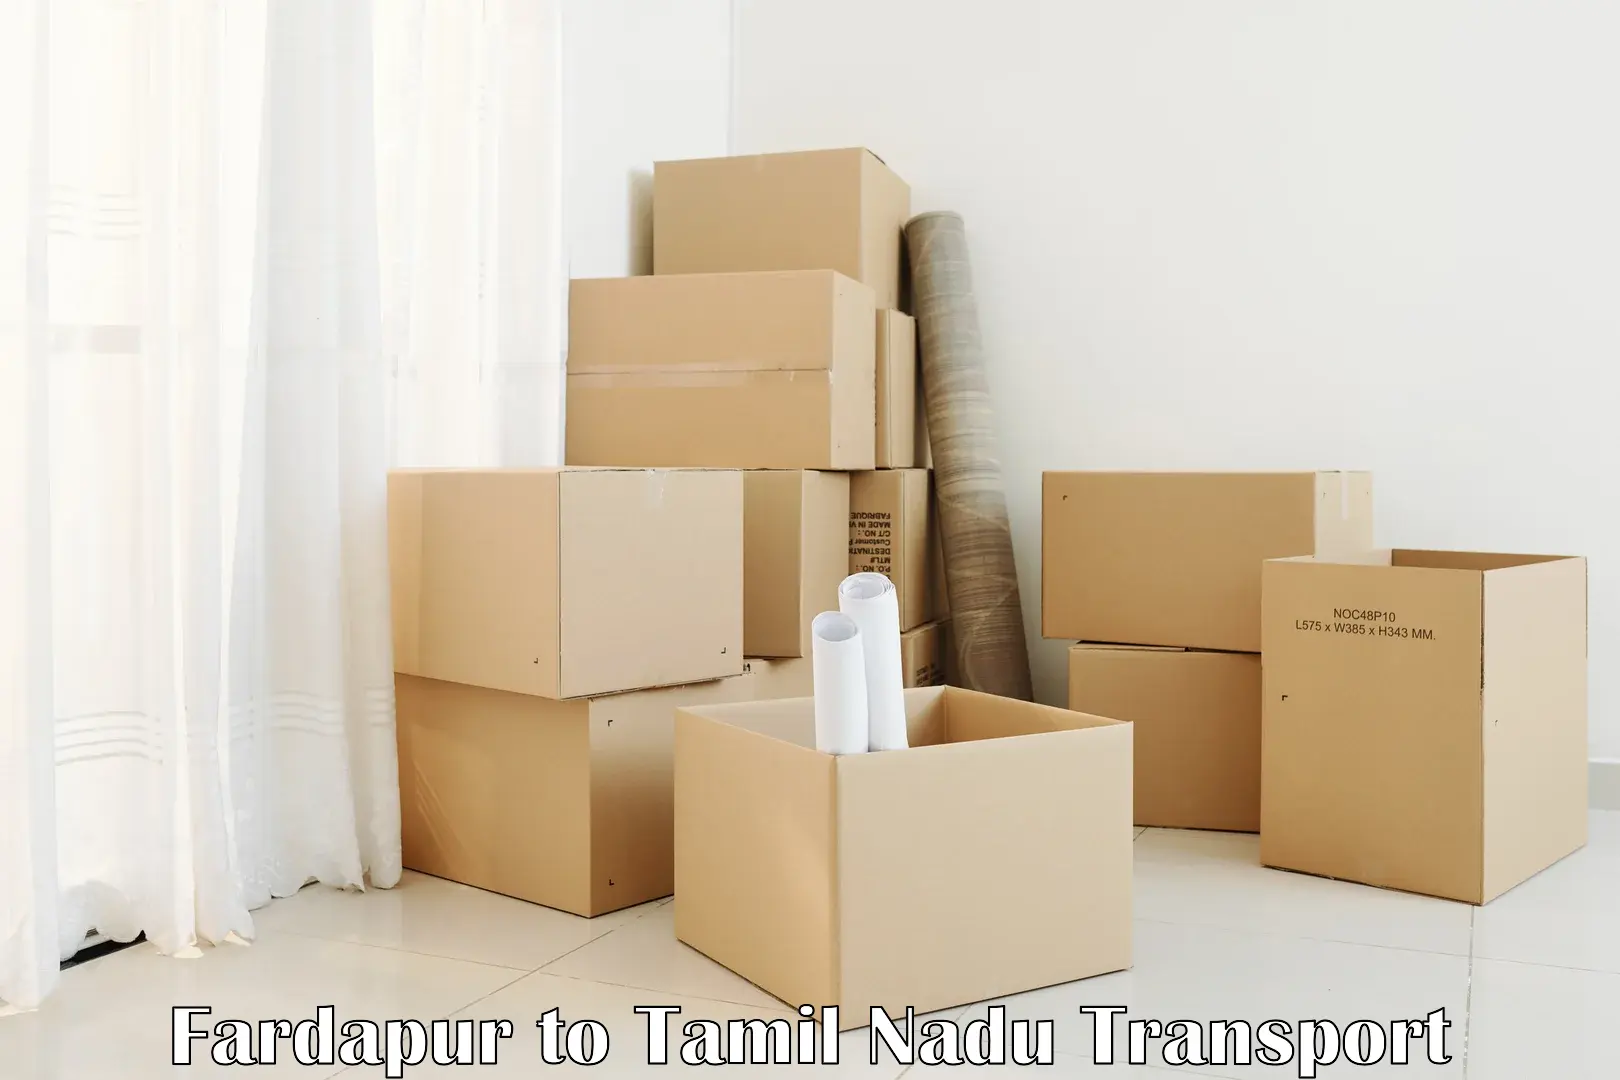 Material transport services Fardapur to Mylapore